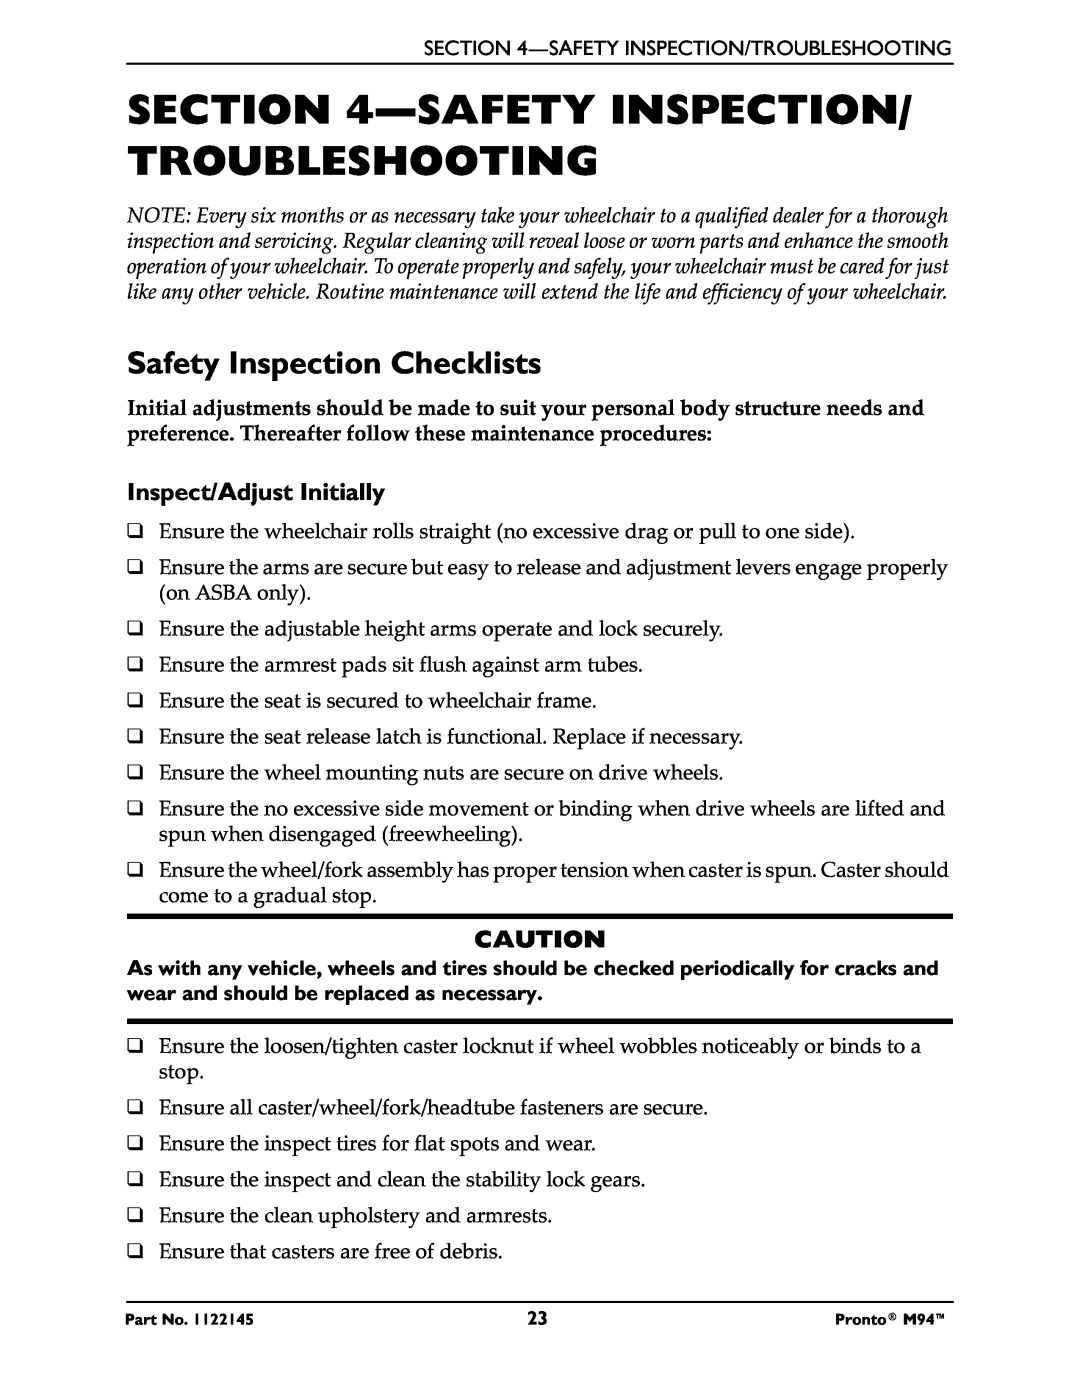 Invacare Pronto M71 manual Safety Inspection/ Troubleshooting, Safety Inspection Checklists 